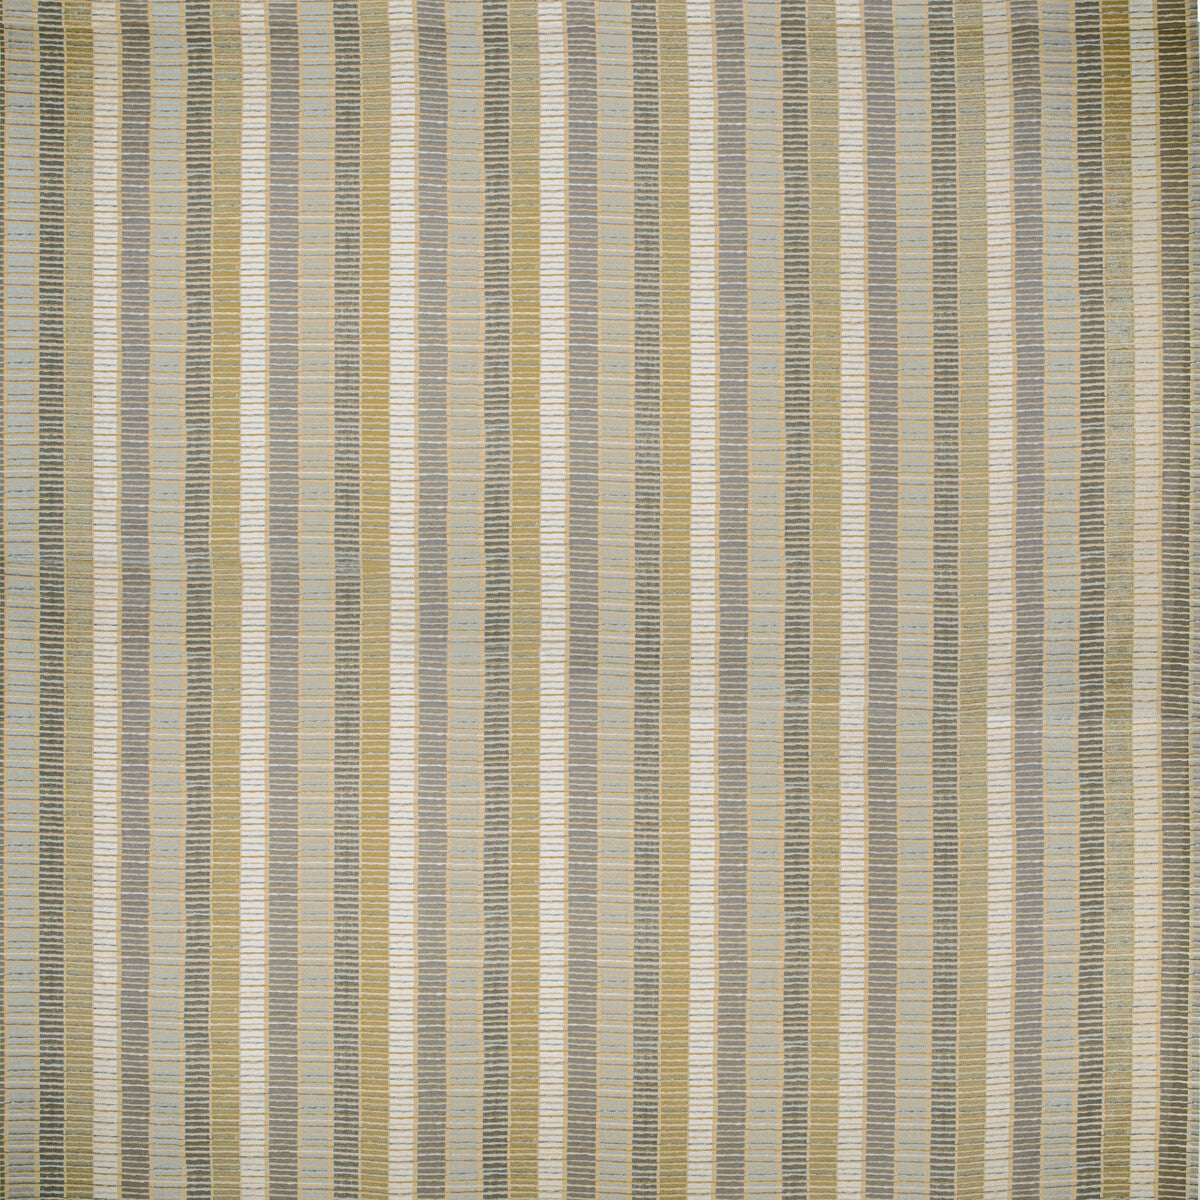 Atoll fabric in beach color - pattern 2019148.16.0 - by Lee Jofa Modern in the Kw Terra Firma III Indoor Outdoor collection